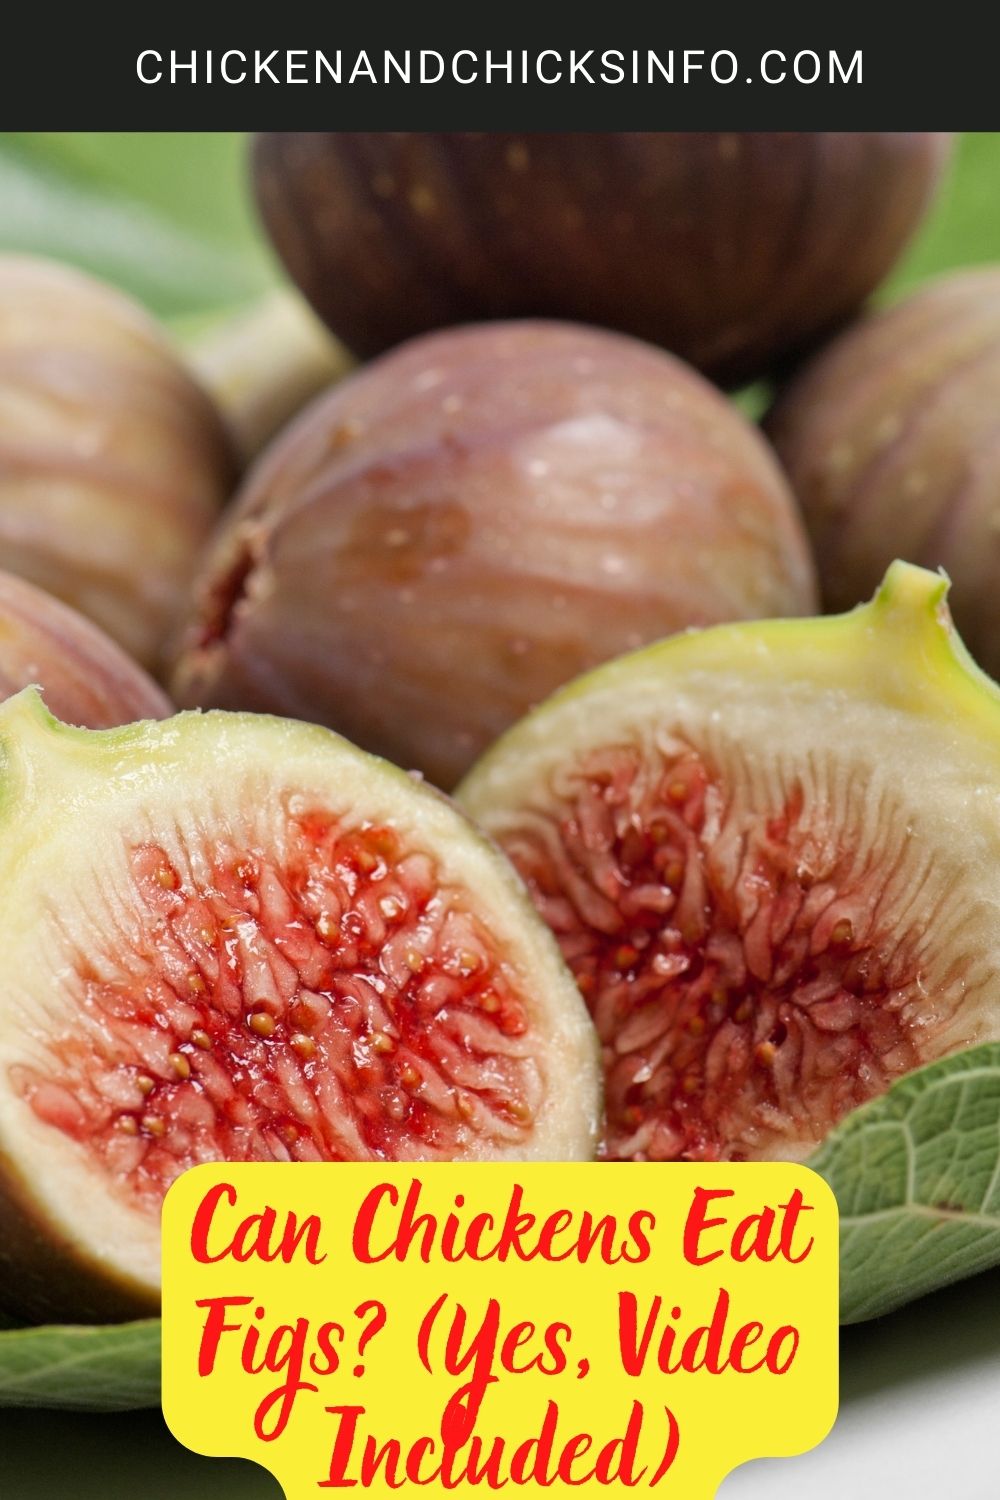 Can Chickens Eat Figs? (Yes, Video Included) poster.
